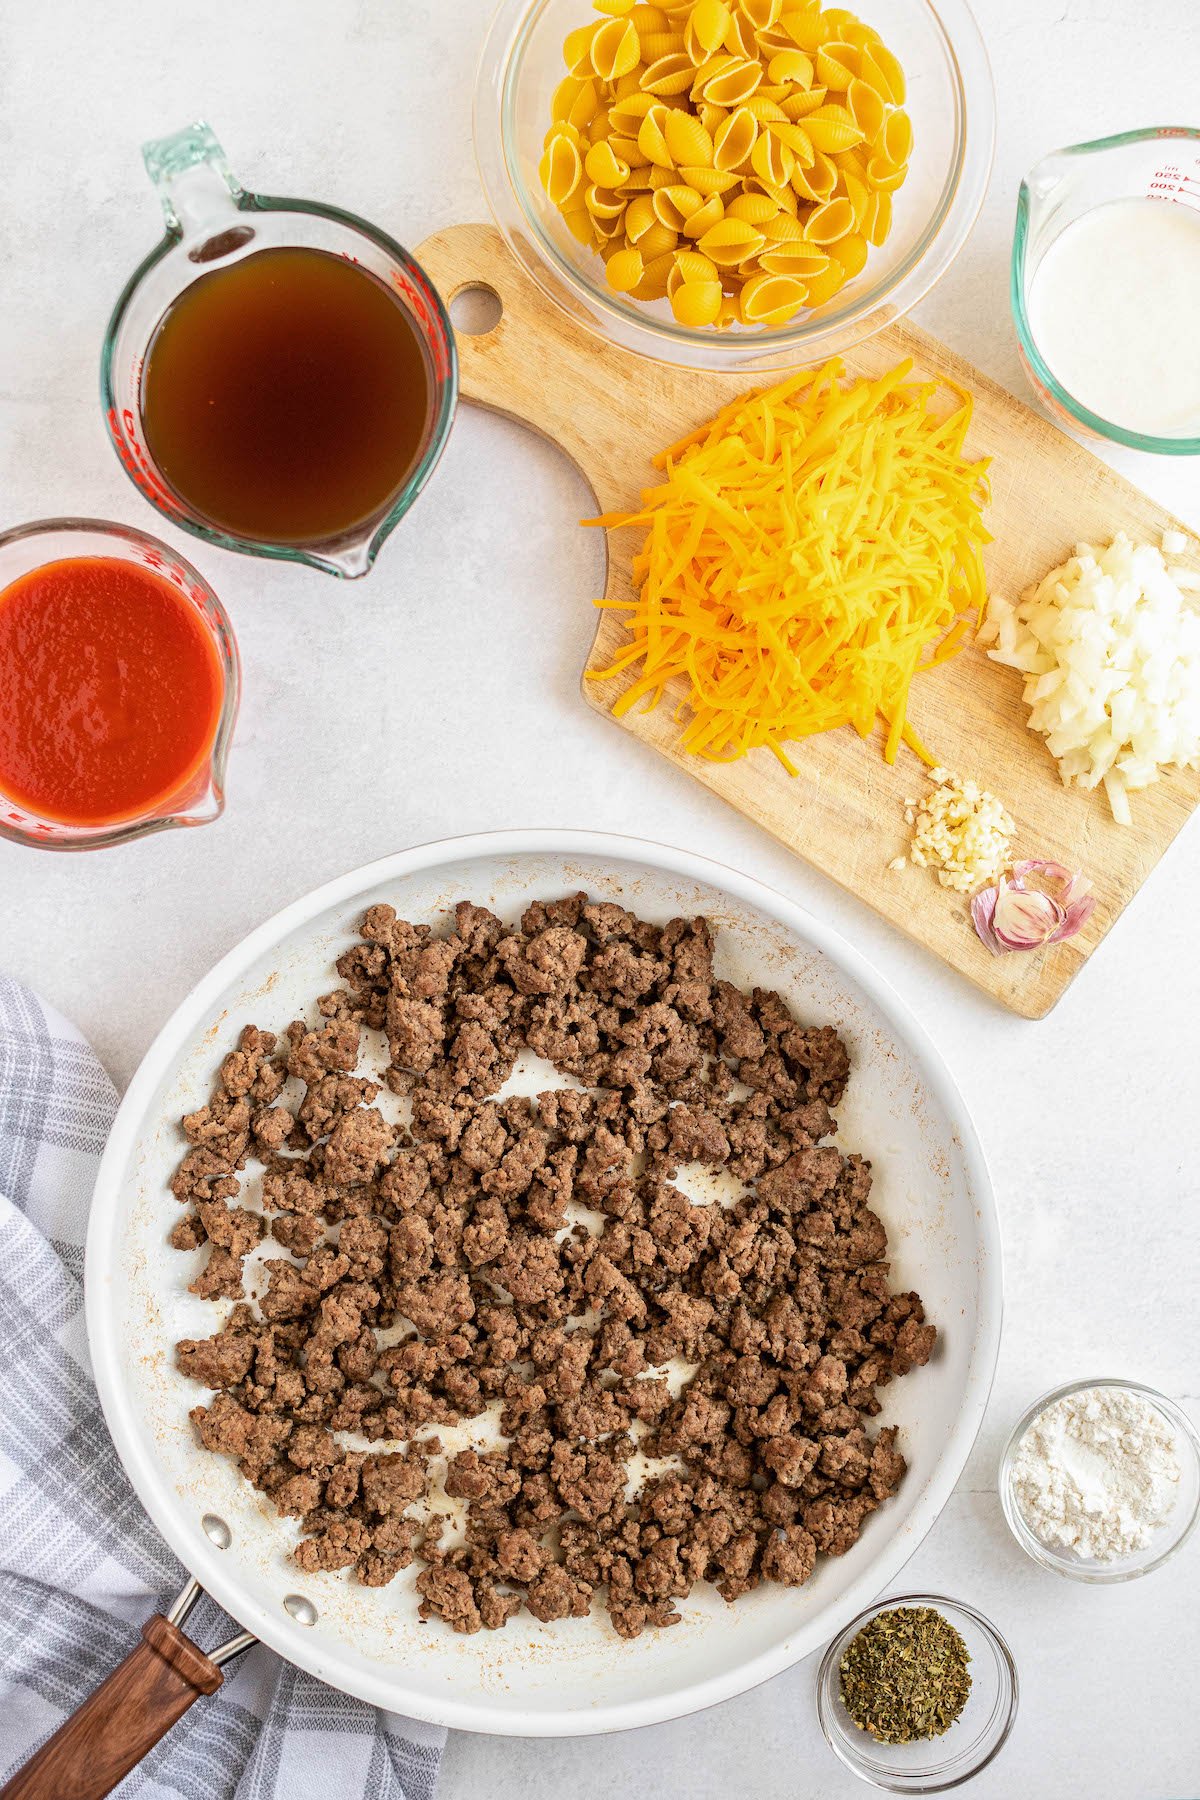 Ingredients for homemade hamburger helper recipe arranged on a countertop in bowls with the ground beef in a skillet.